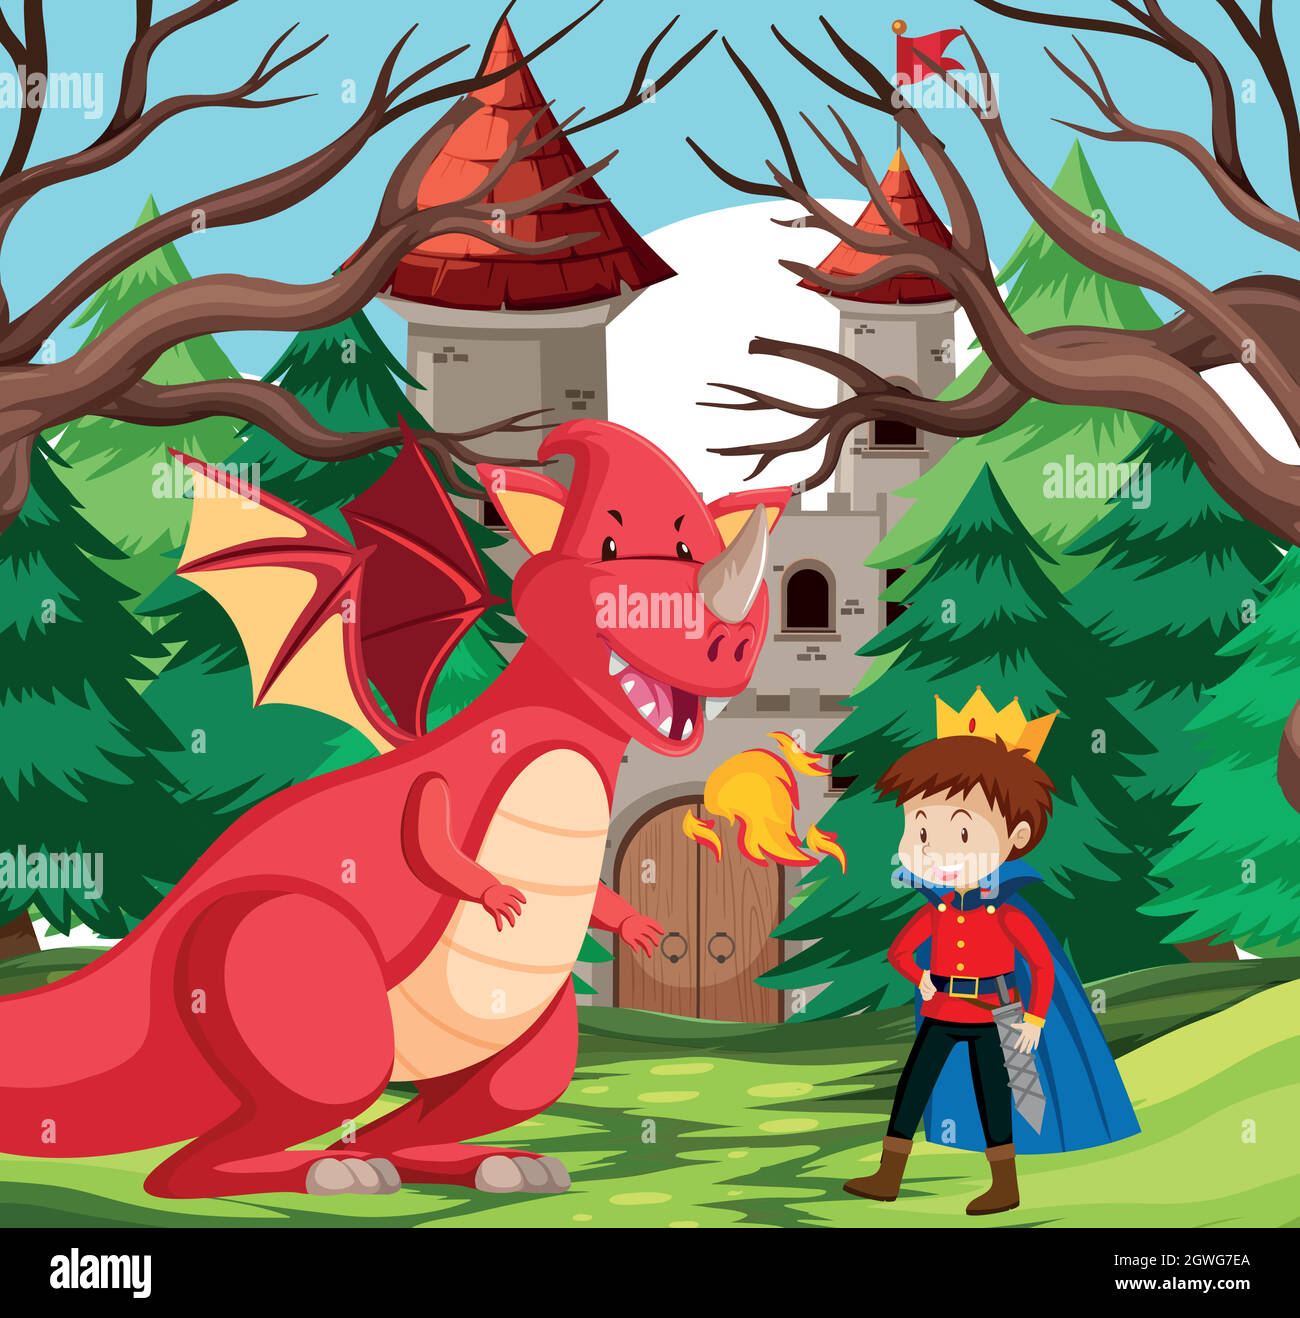 A king and dragon at castle Stock Vector